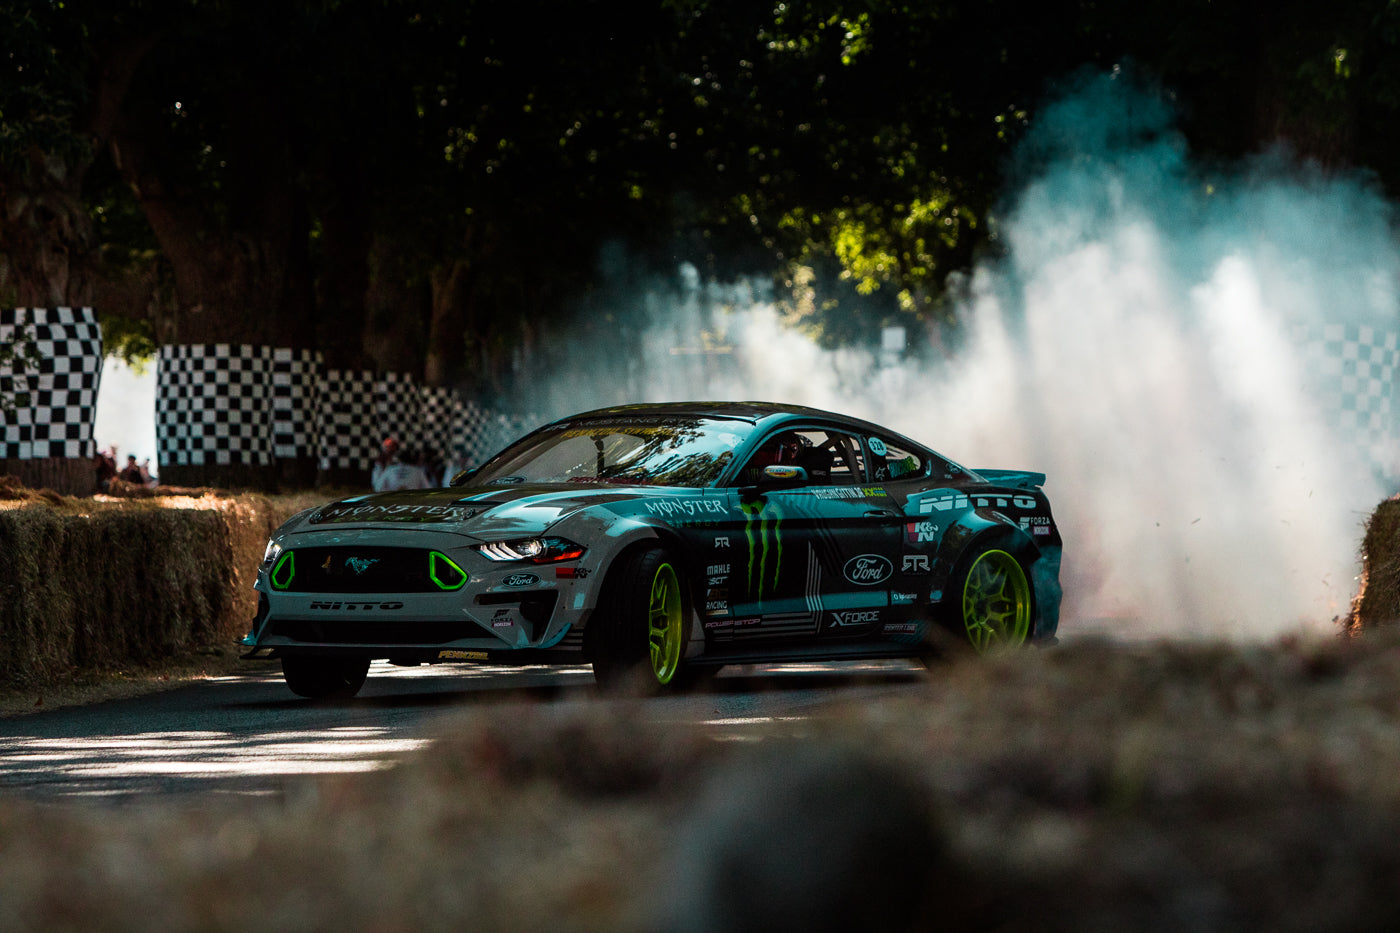 A Mustang RTR is oversteered by Vaughn Gittin Jr. showcasing drifting at the Goodwood Festival of Speed. (Photo: Alex Lawrence – The White Wall 2018)